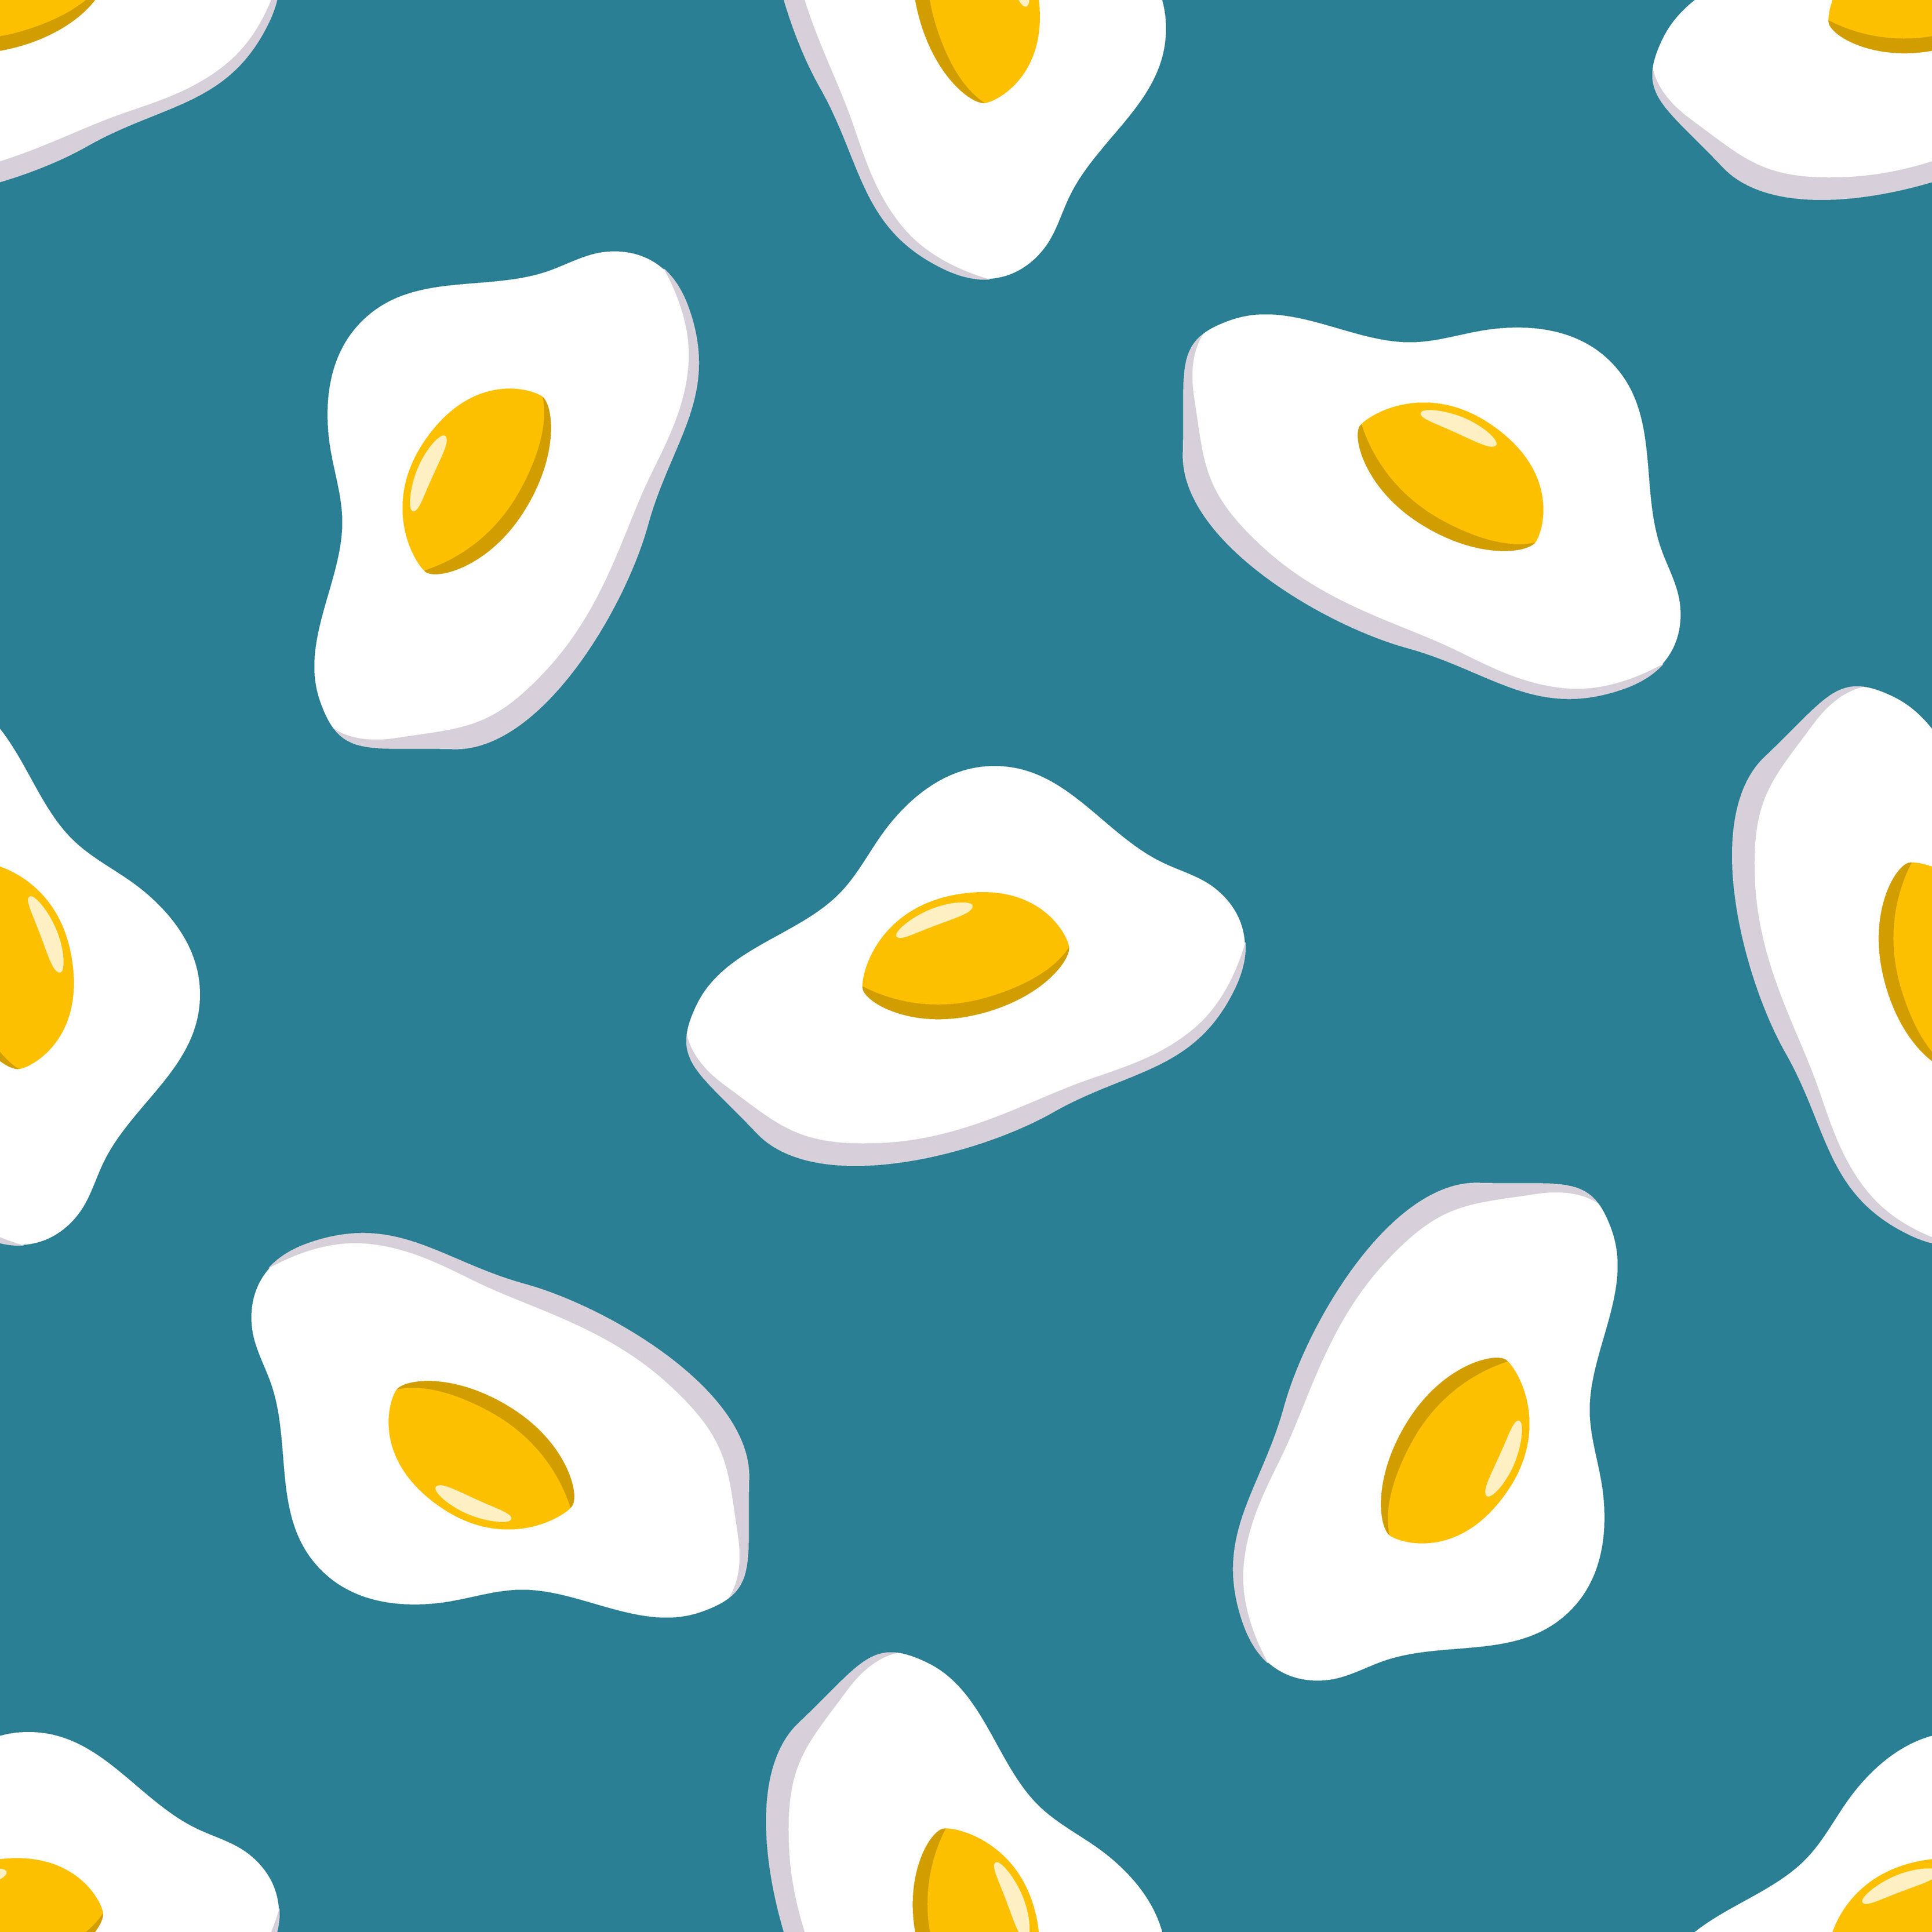 A pattern of eggs on blue background - Egg